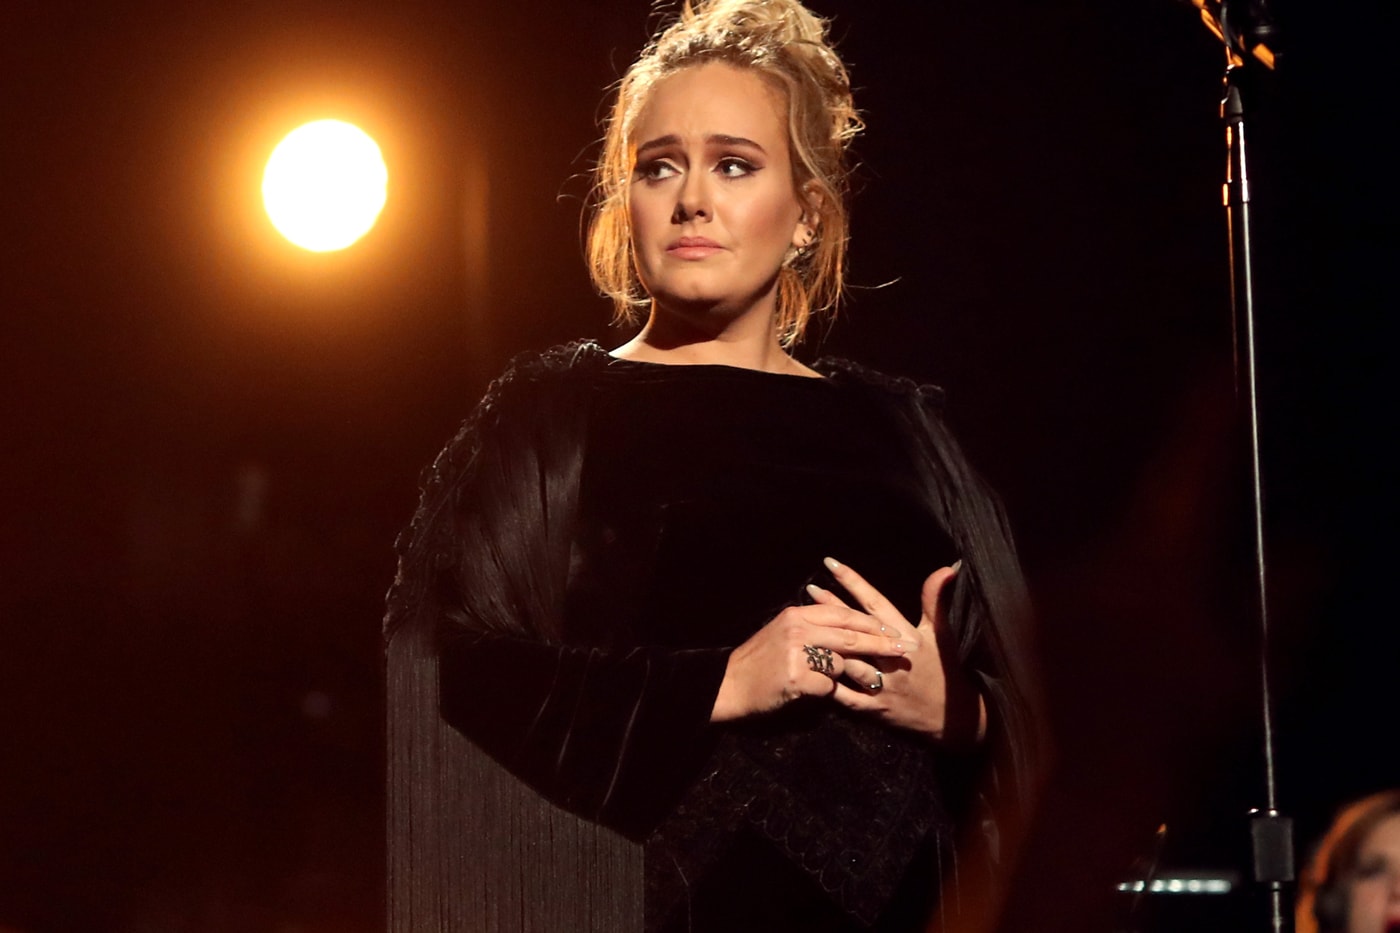 Adele Doesn't Want Donald Trump to Use Her Music